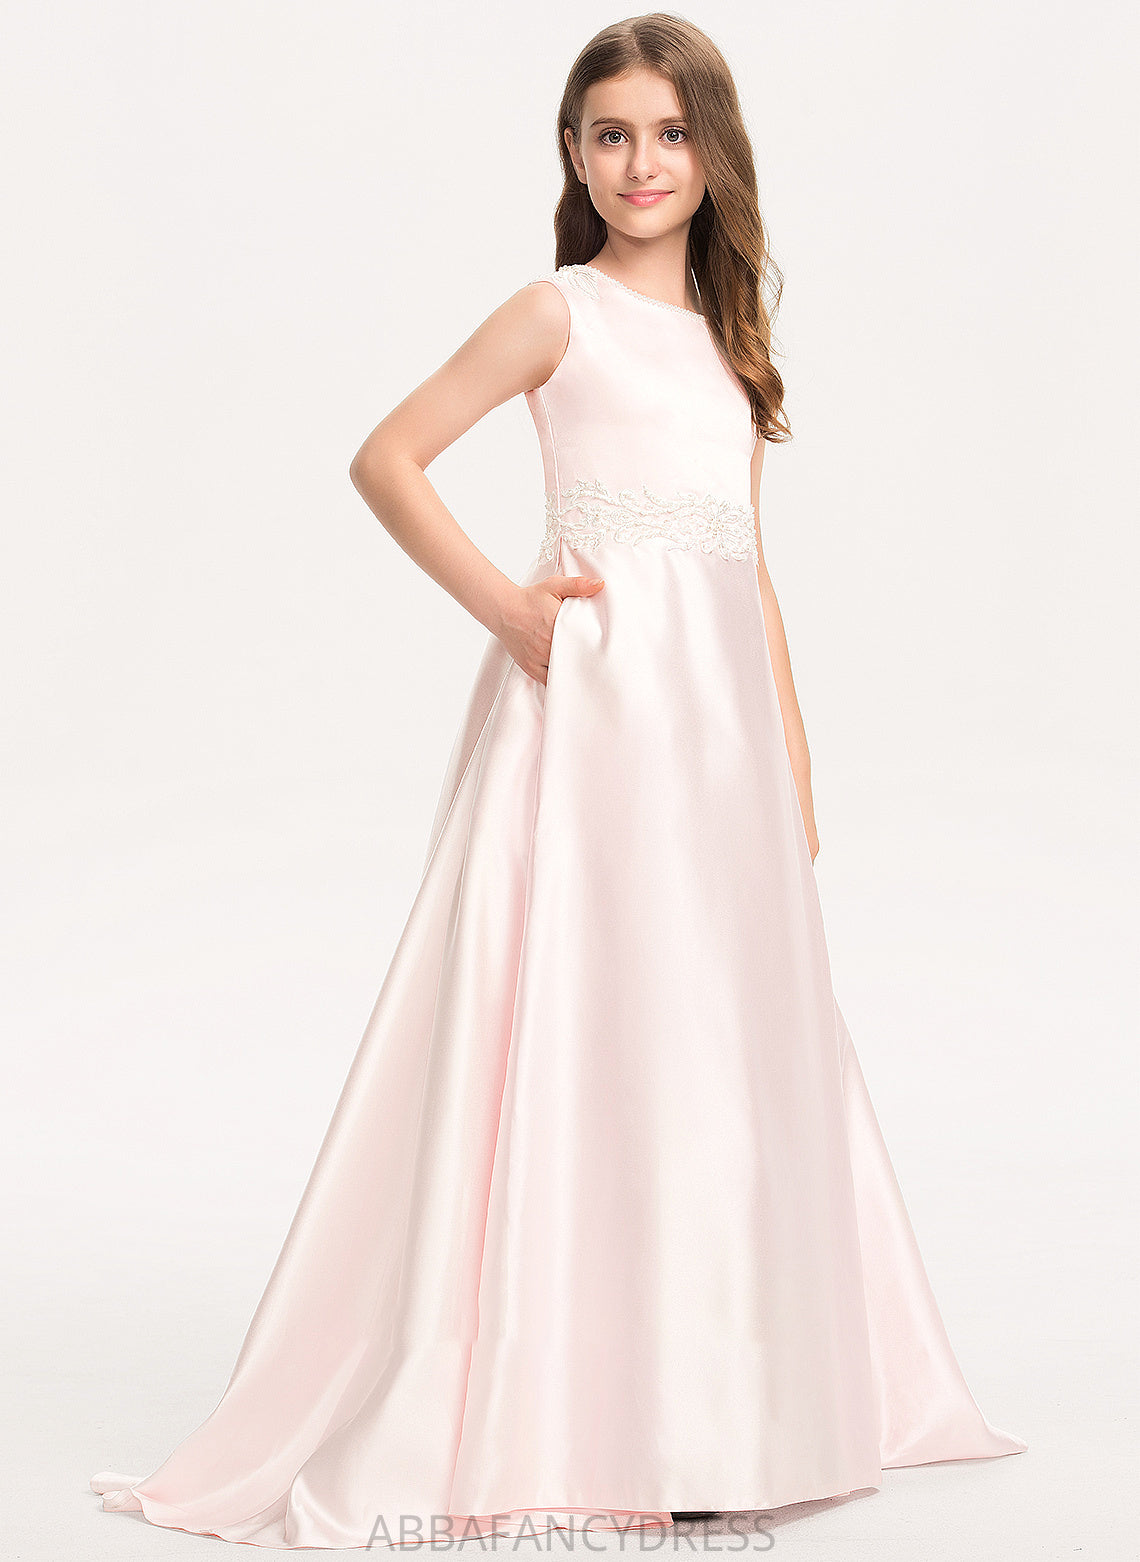 Junior Bridesmaid Dresses Neck Lace Bow(s) A-Line Sweep Satin With Scoop Train Samantha Pockets